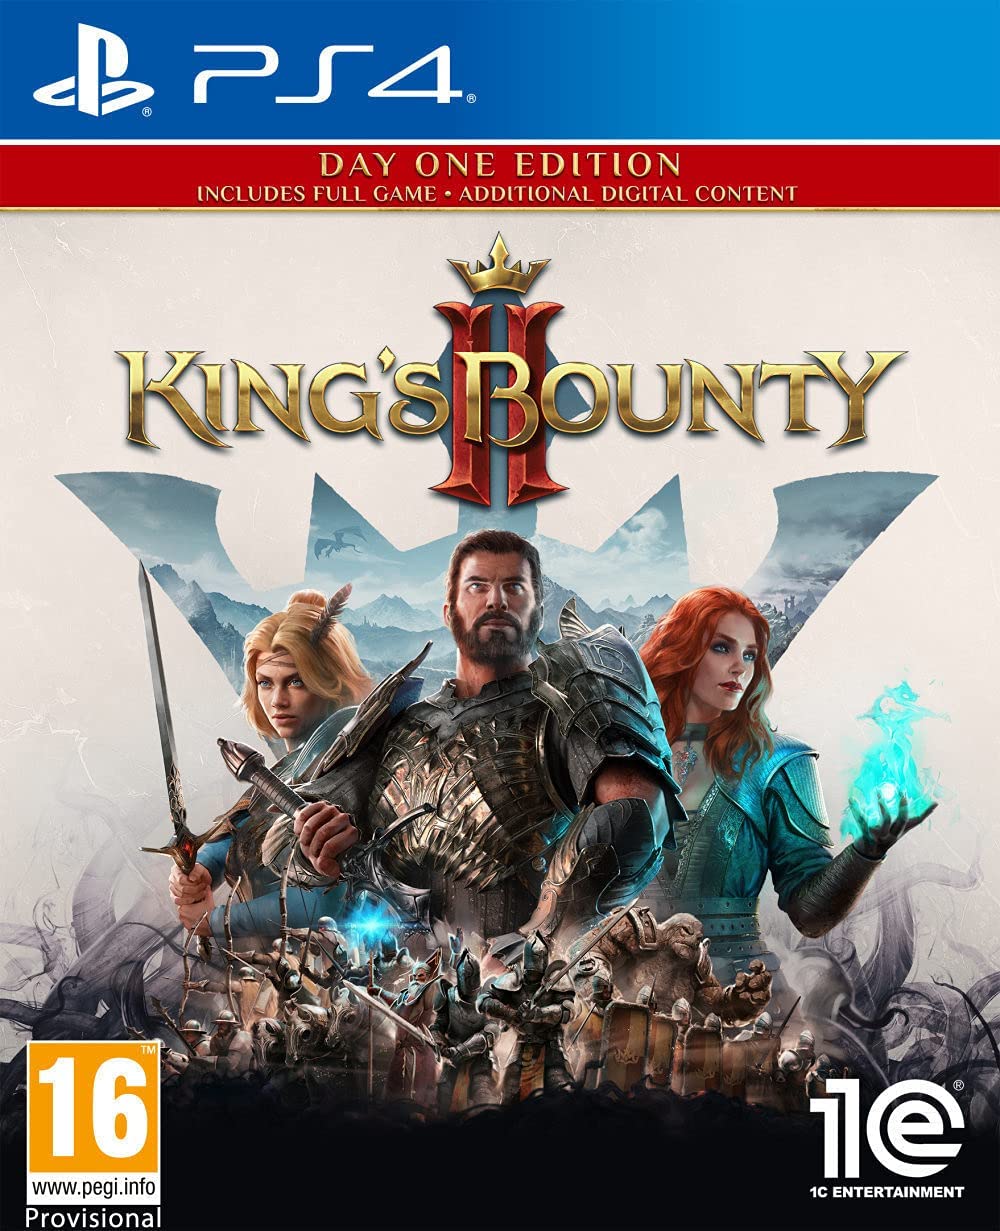 King's Bounty 2 – Day One Edition